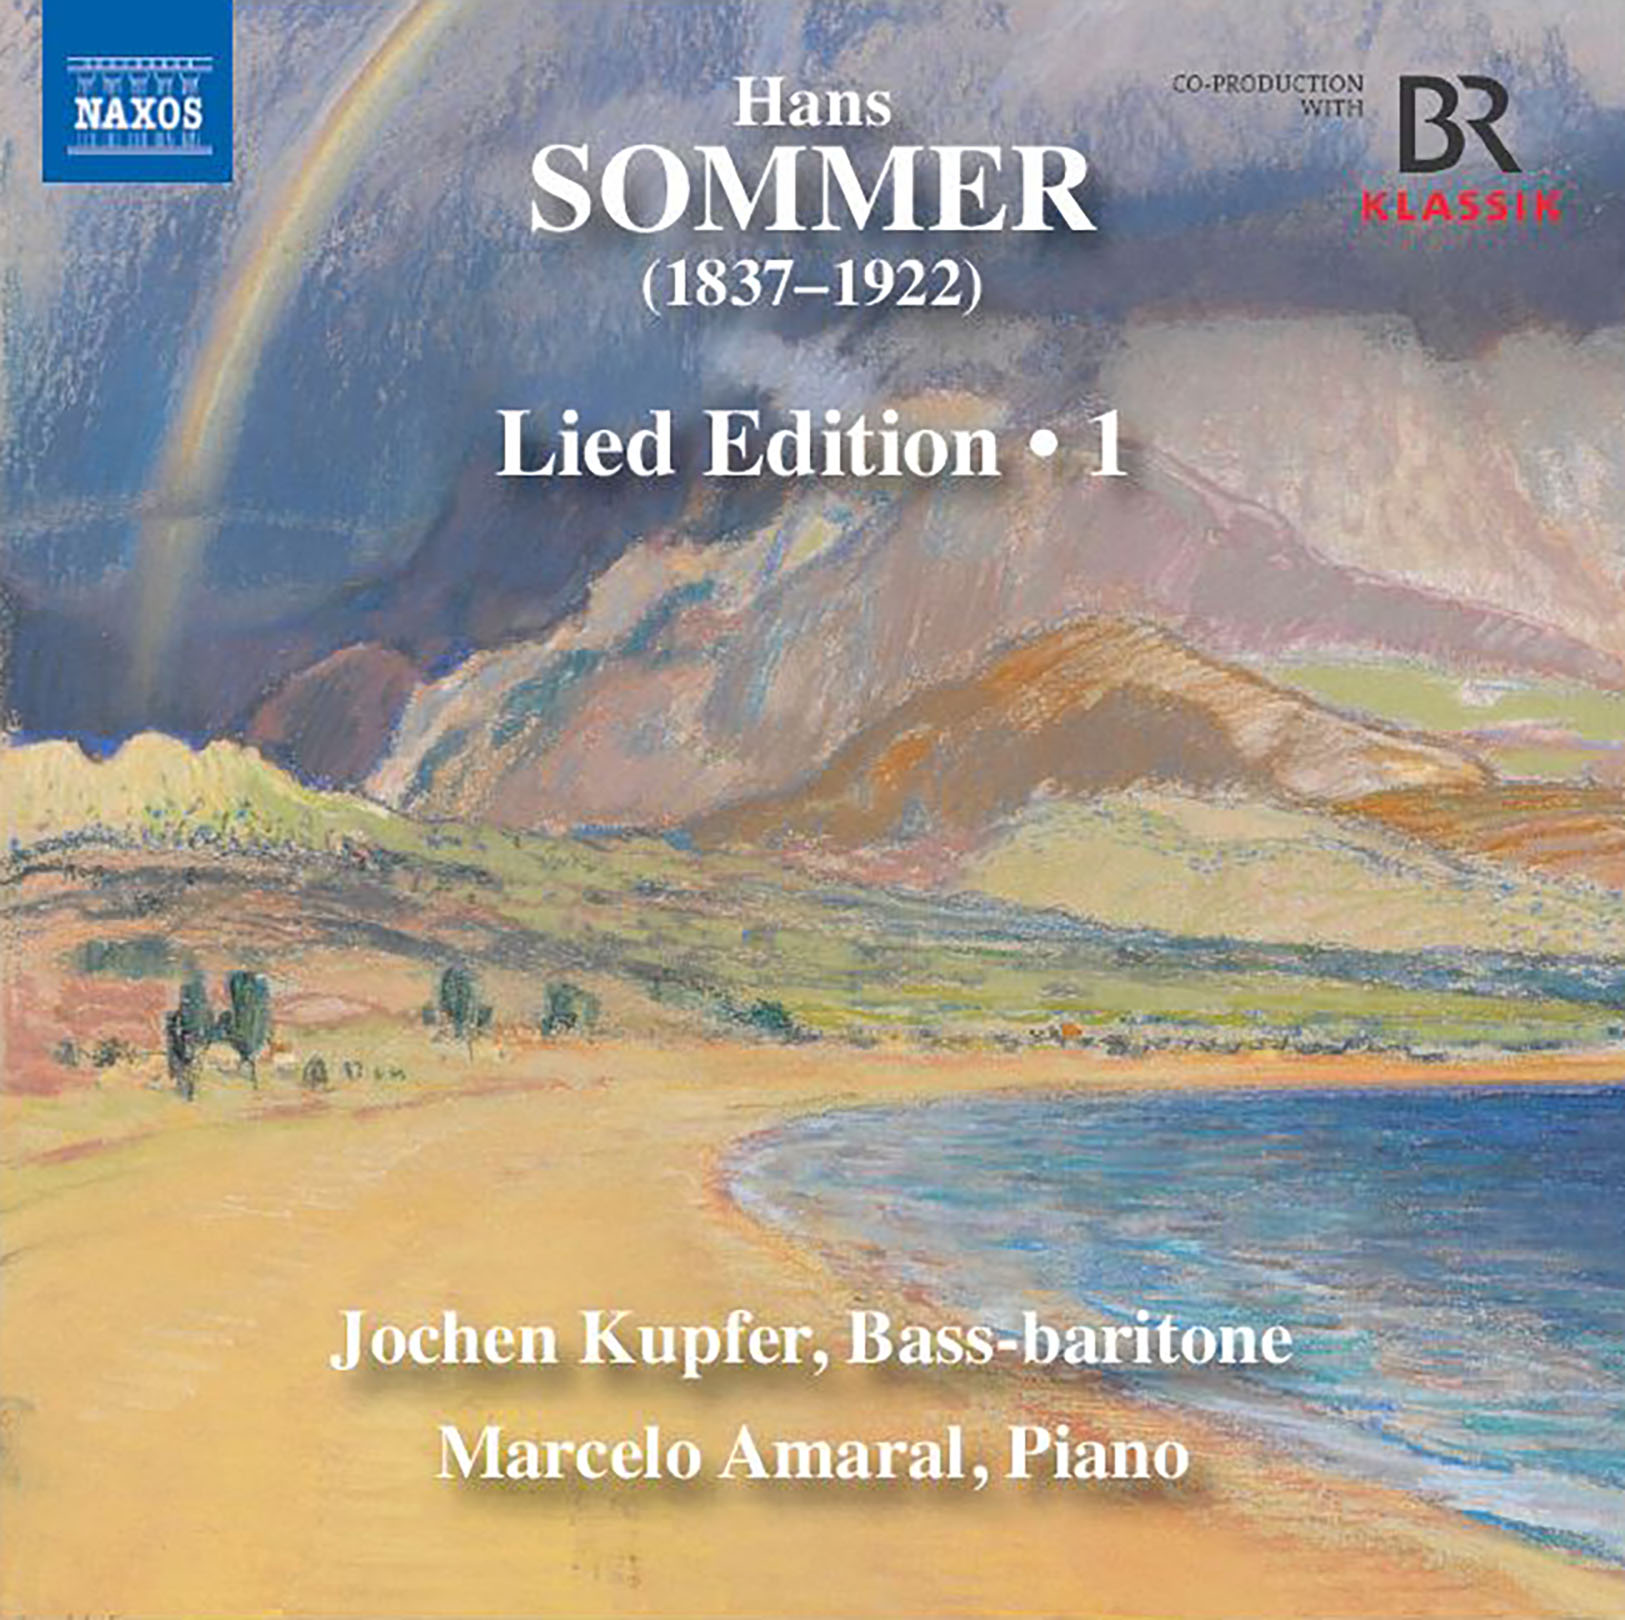 CD Cover Sommer Lied Edition Vol. 1